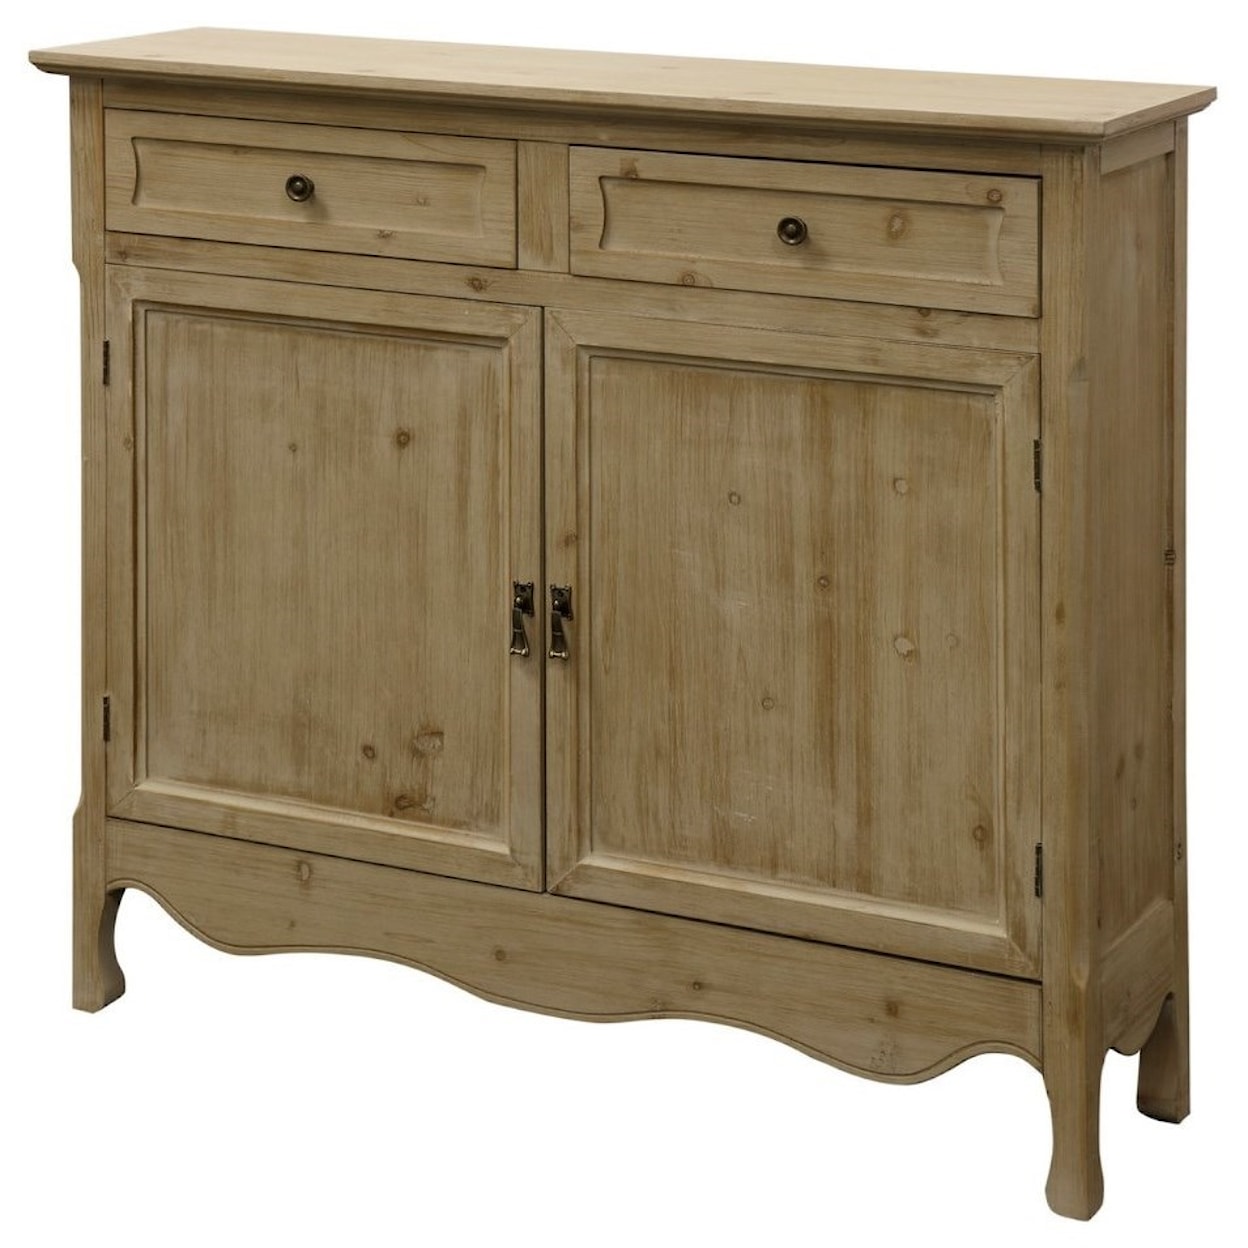 StyleCraft Occasional Cabinets Wood Cabinet